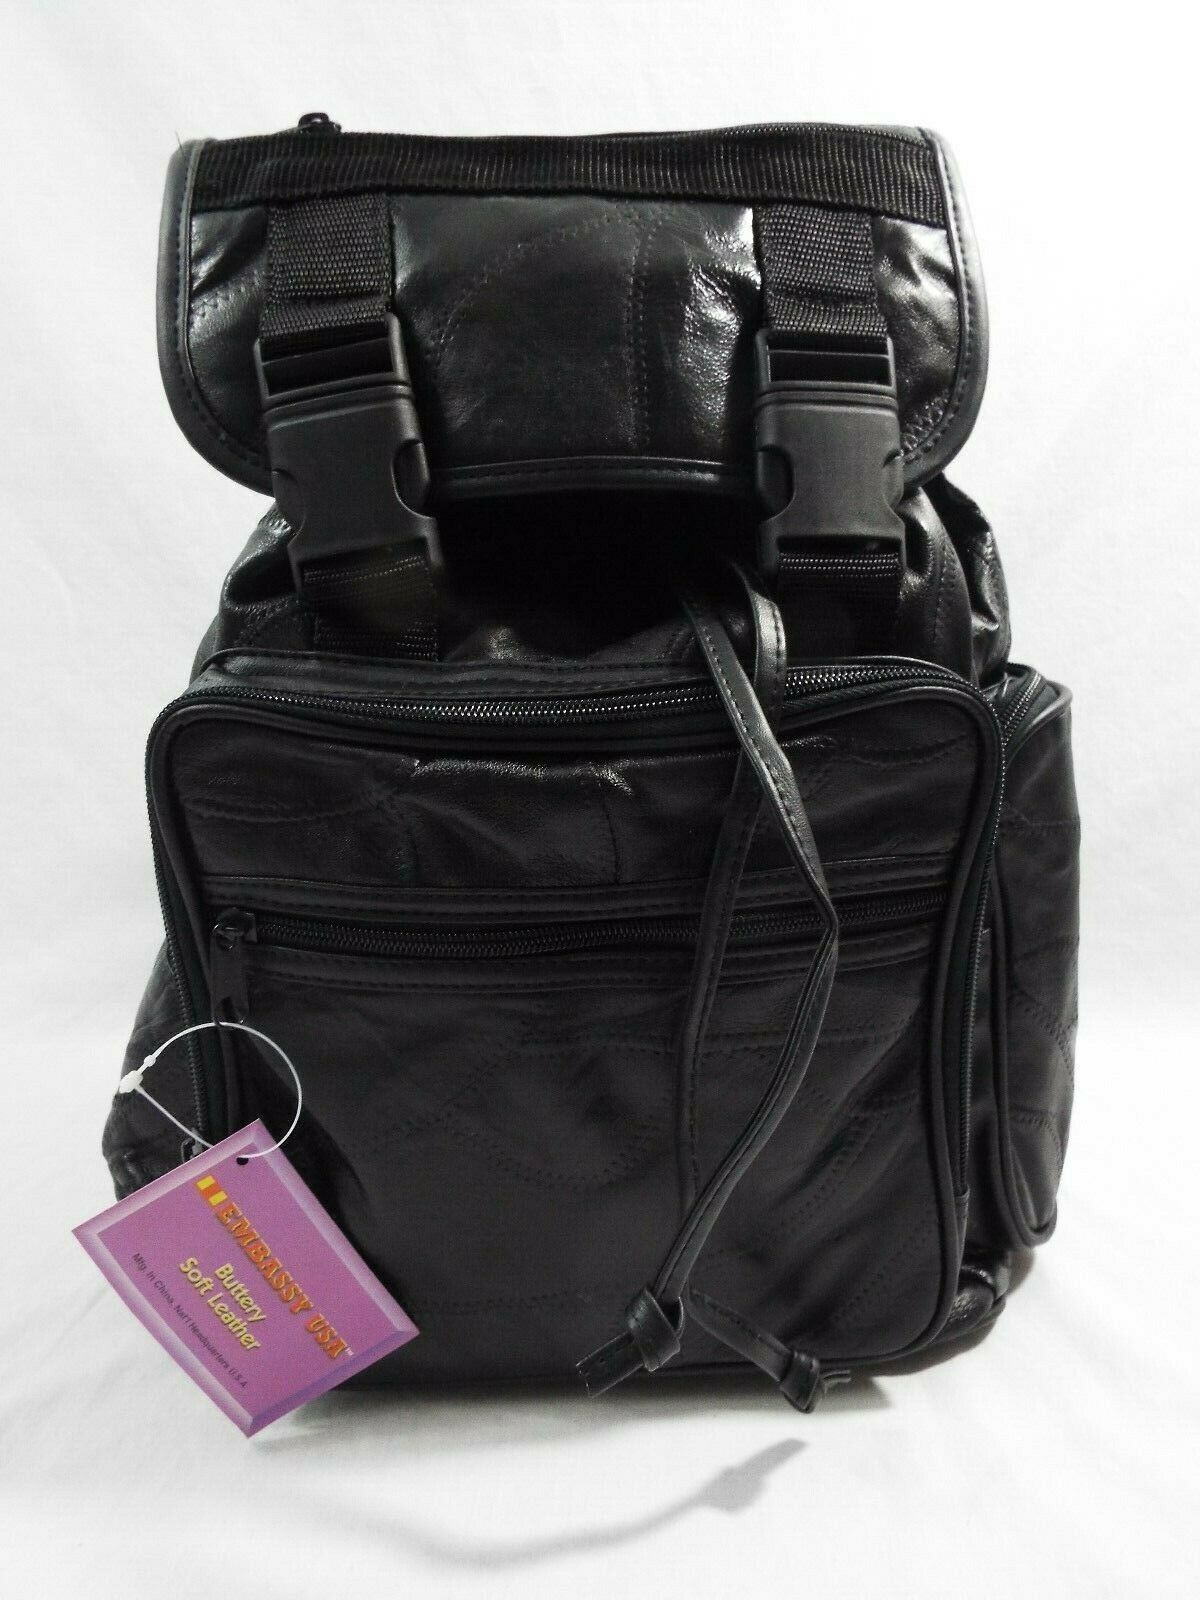 Embassy USA Buttery Soft Leather Black Backpack Zippers Pockets - Women&#39;s Bags & Handbags